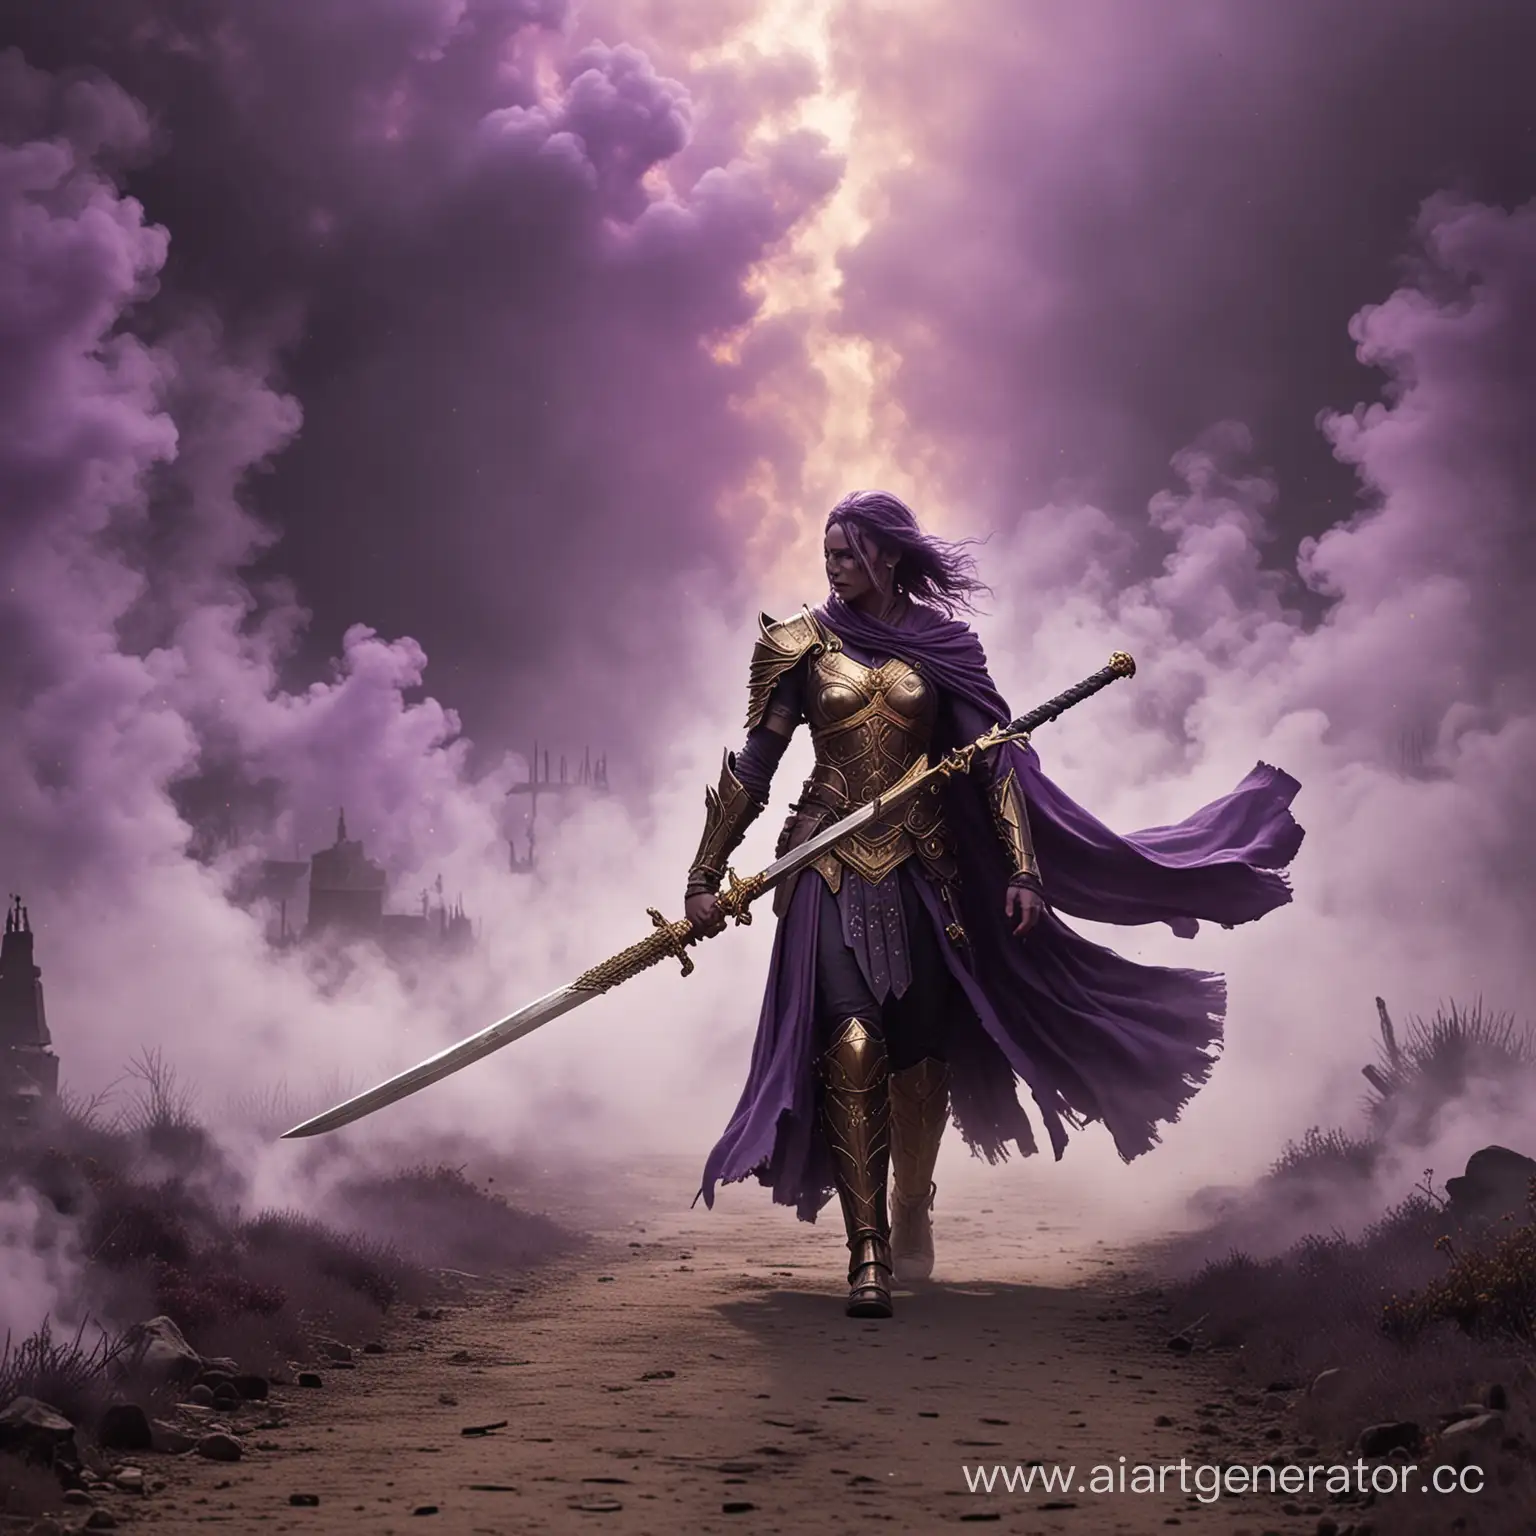 Courageous-Warrior-of-Light-Fleeing-from-DarkPurple-Smoke-with-Titanium-and-Gold-Sword